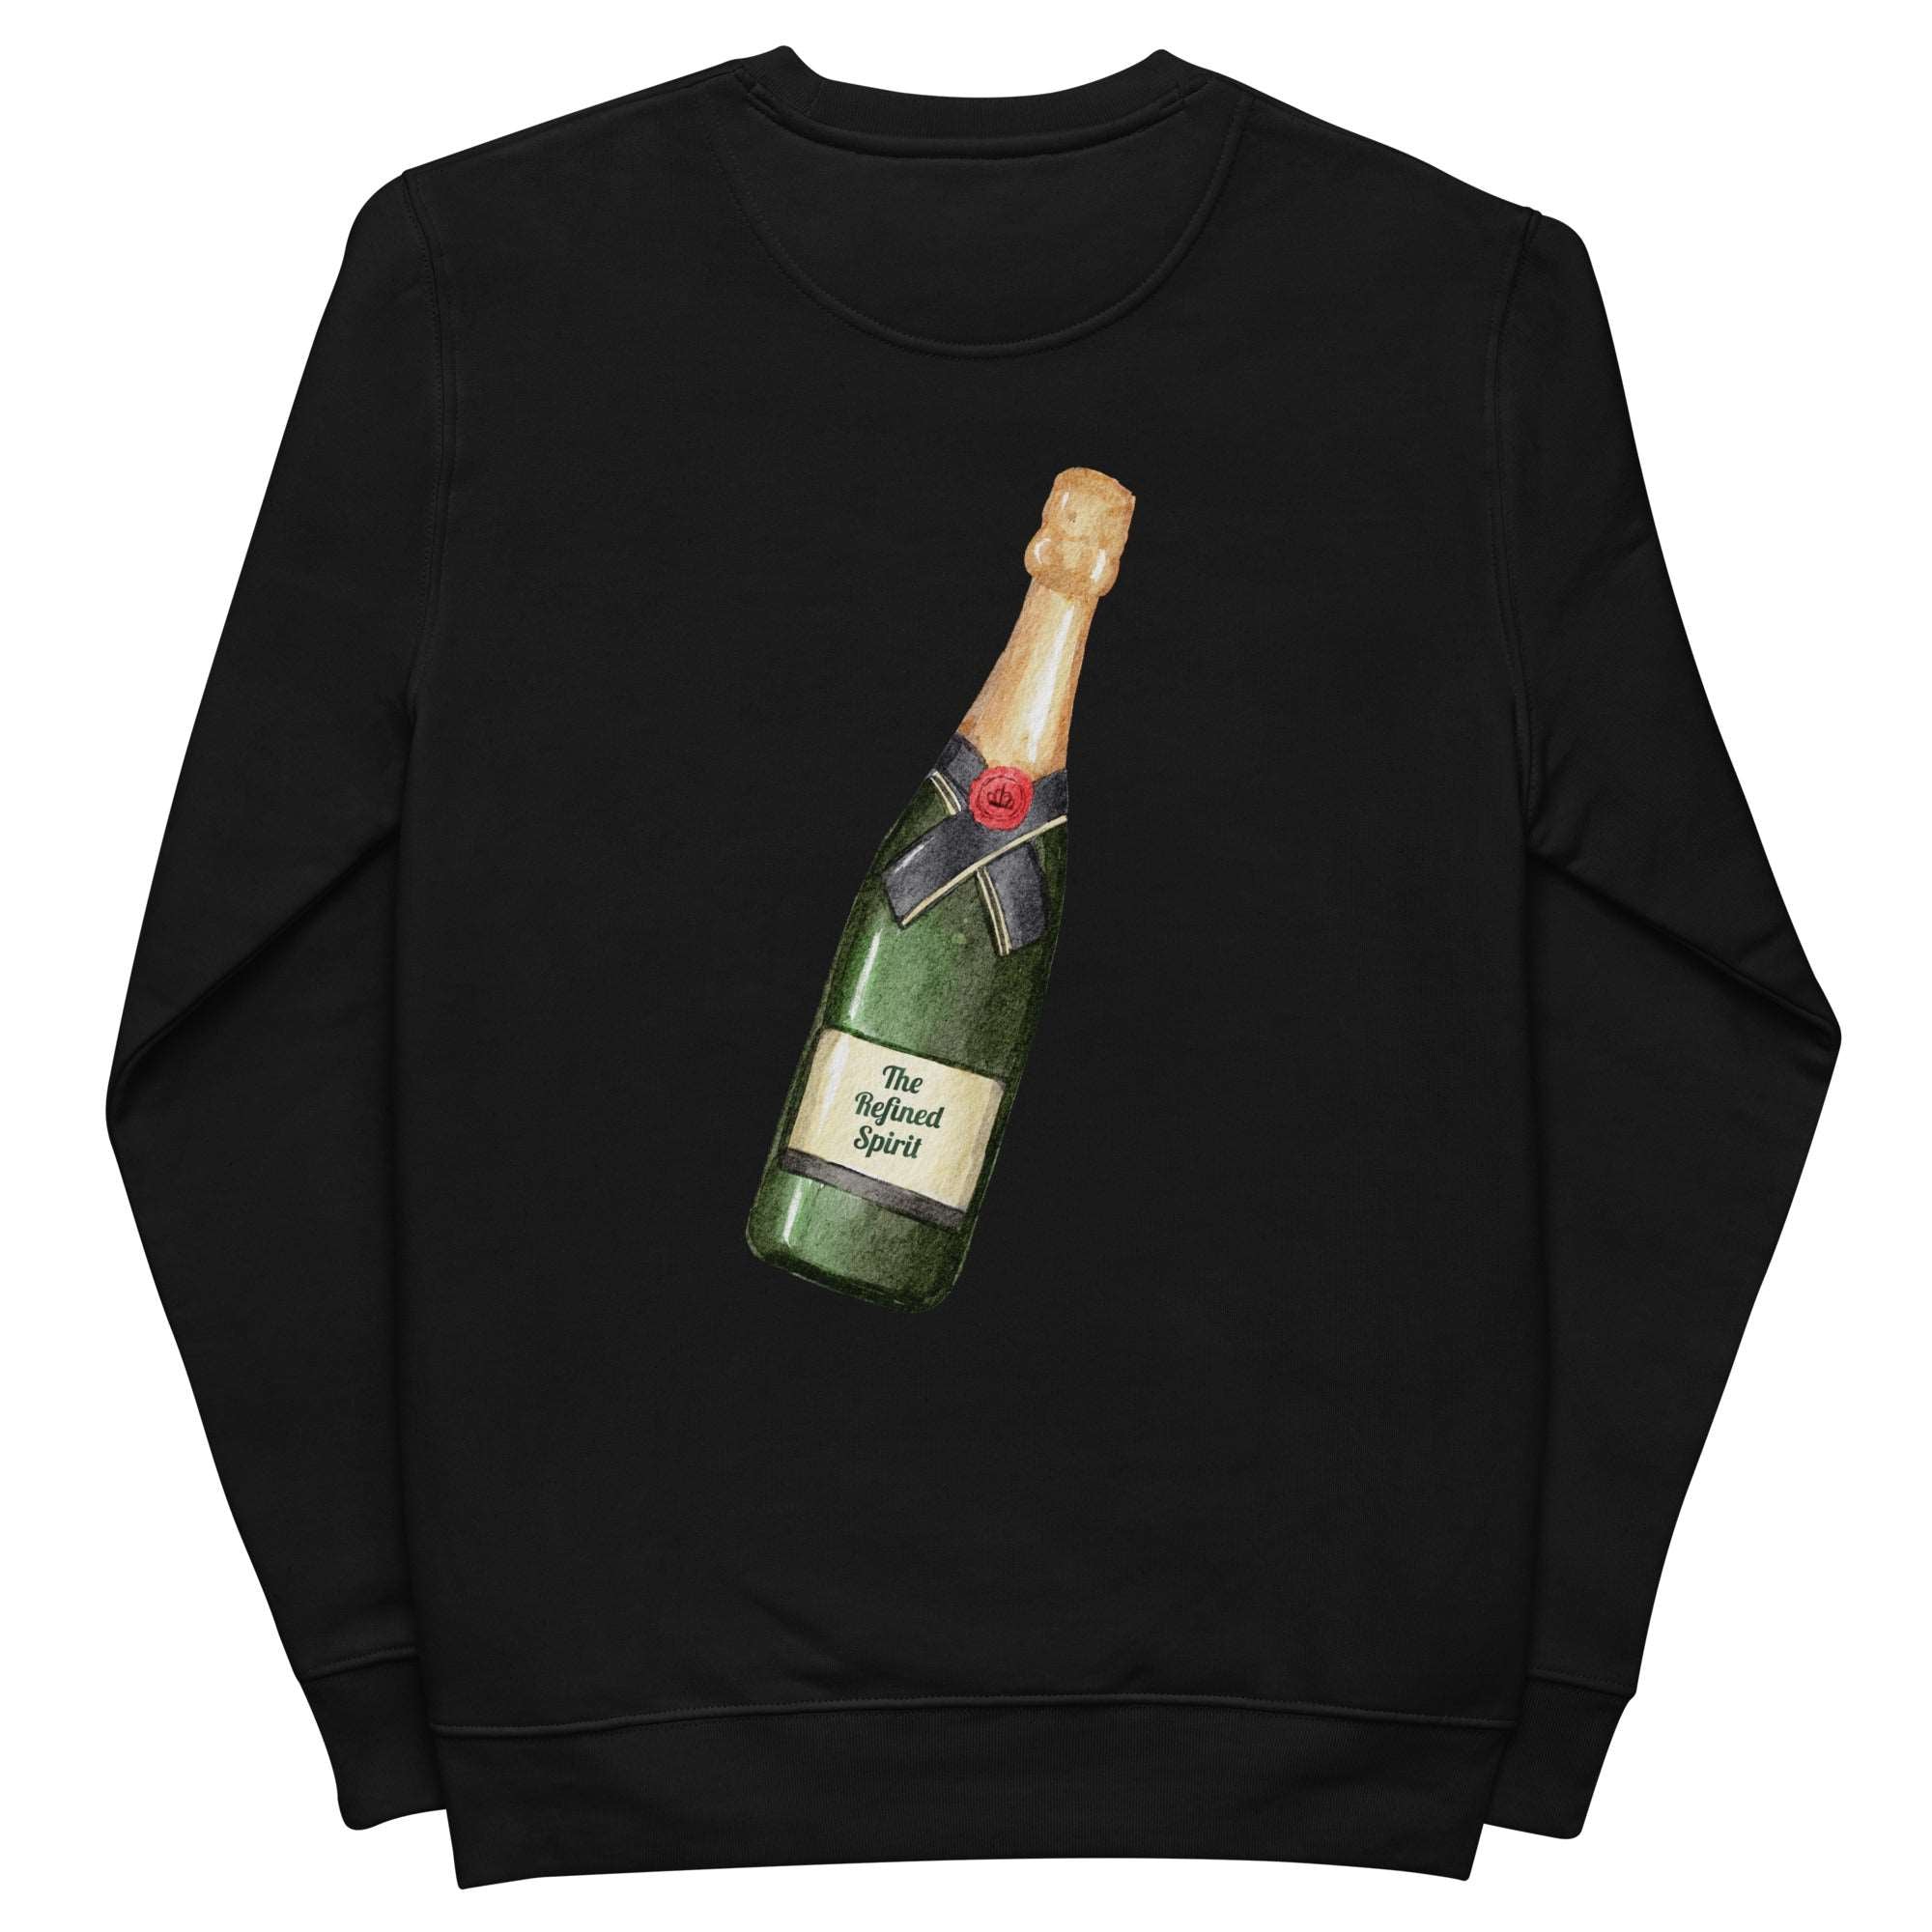 The Champagne Club - Organic Embroidered Sweatshirt - The Refined Spirit